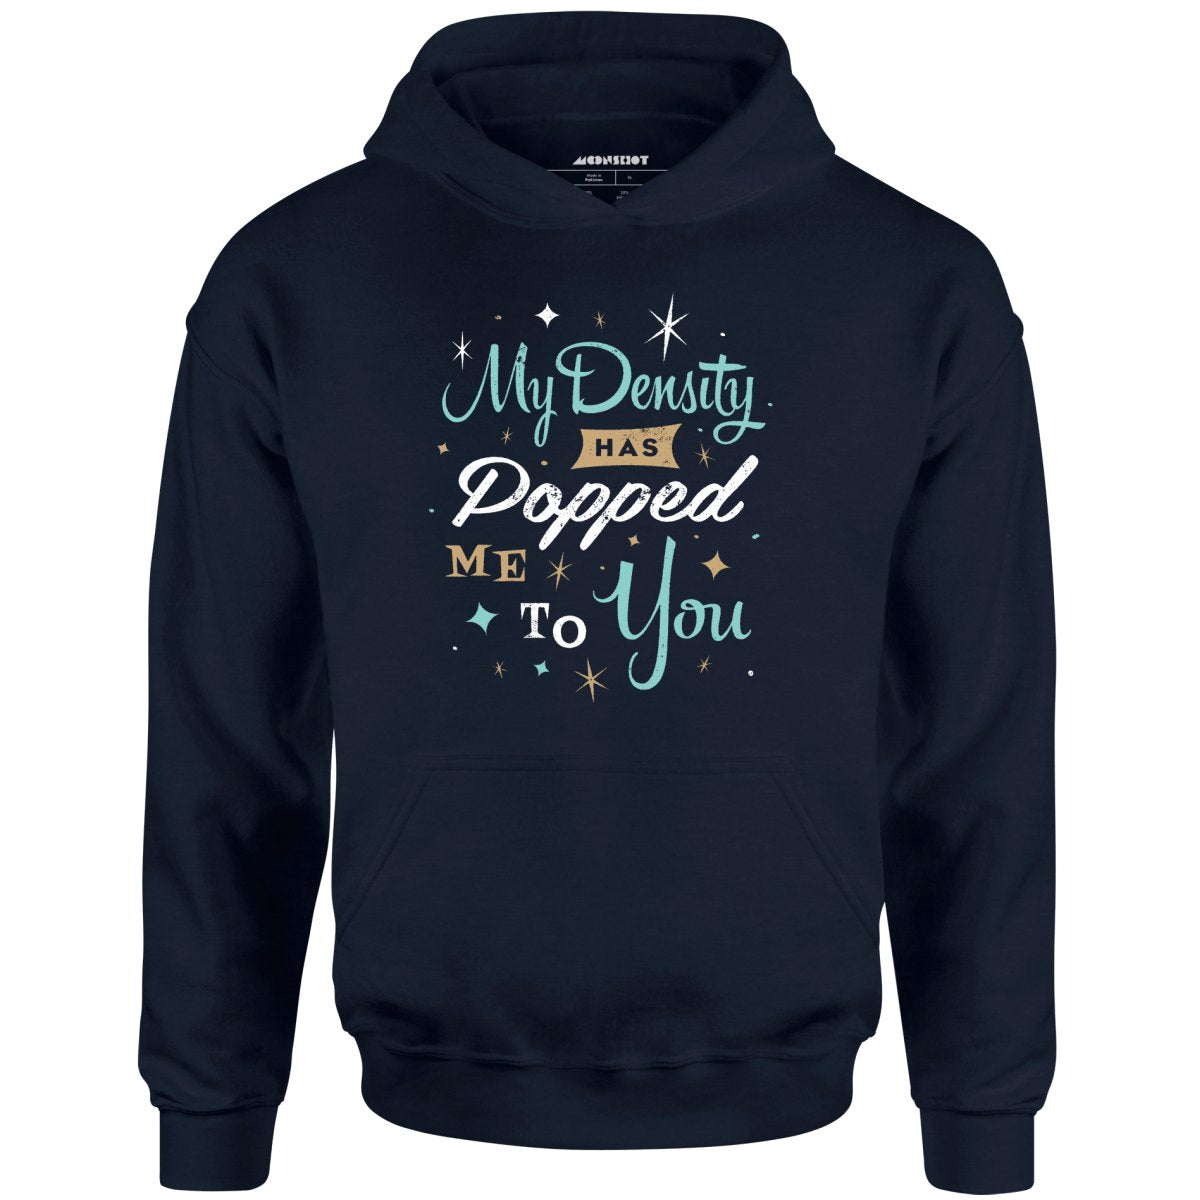 My Density Has Popped Me To You - Unisex Hoodie